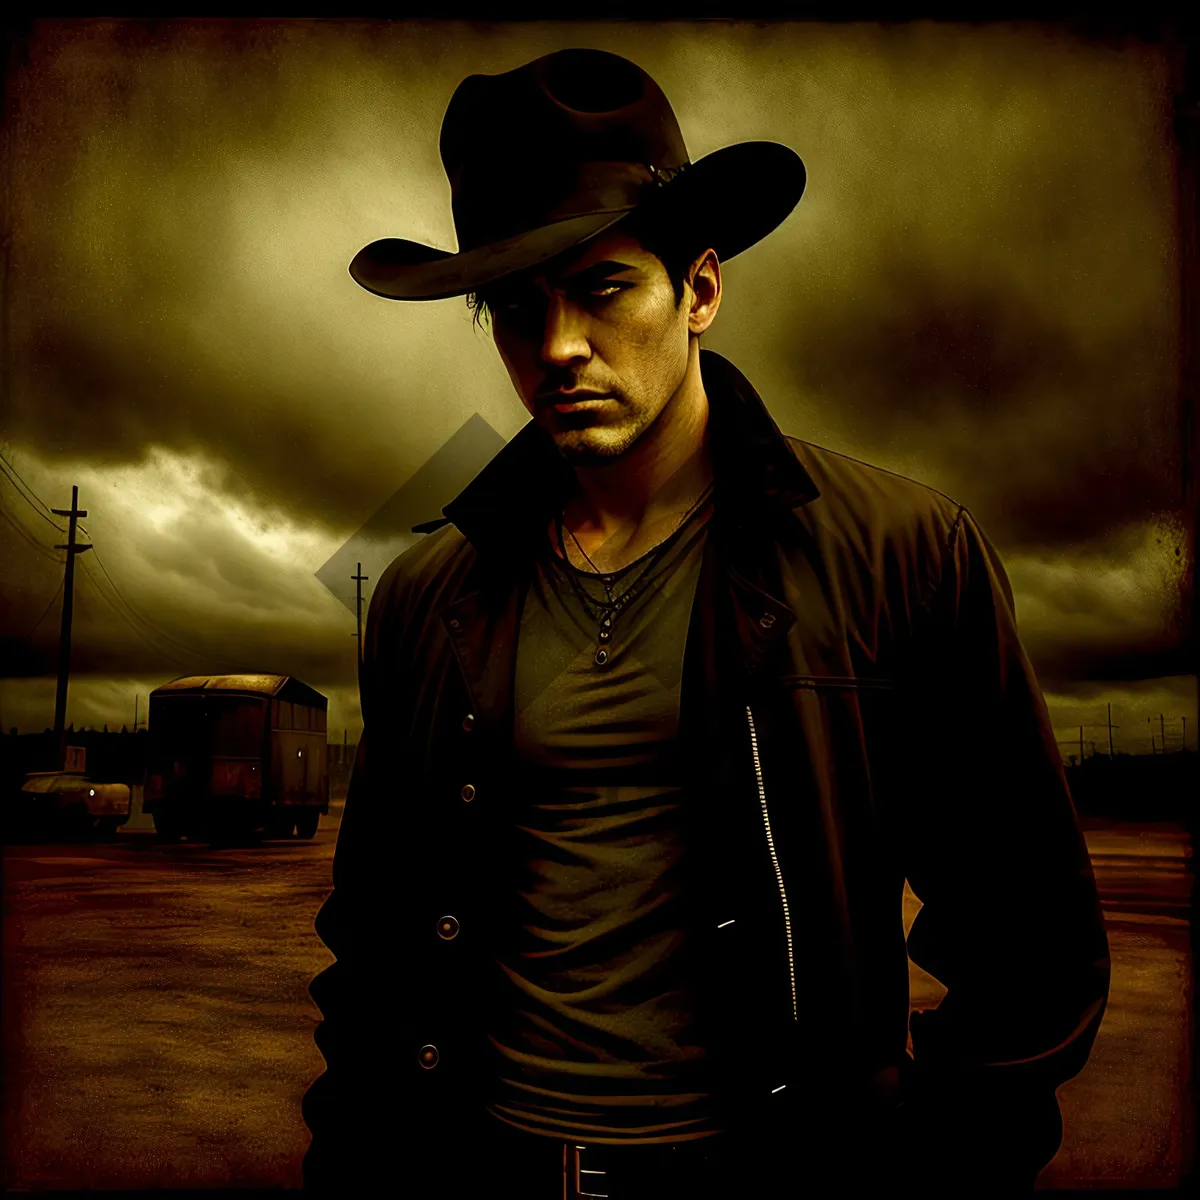 Picture of Stylish Cowboy: Black Hat Fashion for Men